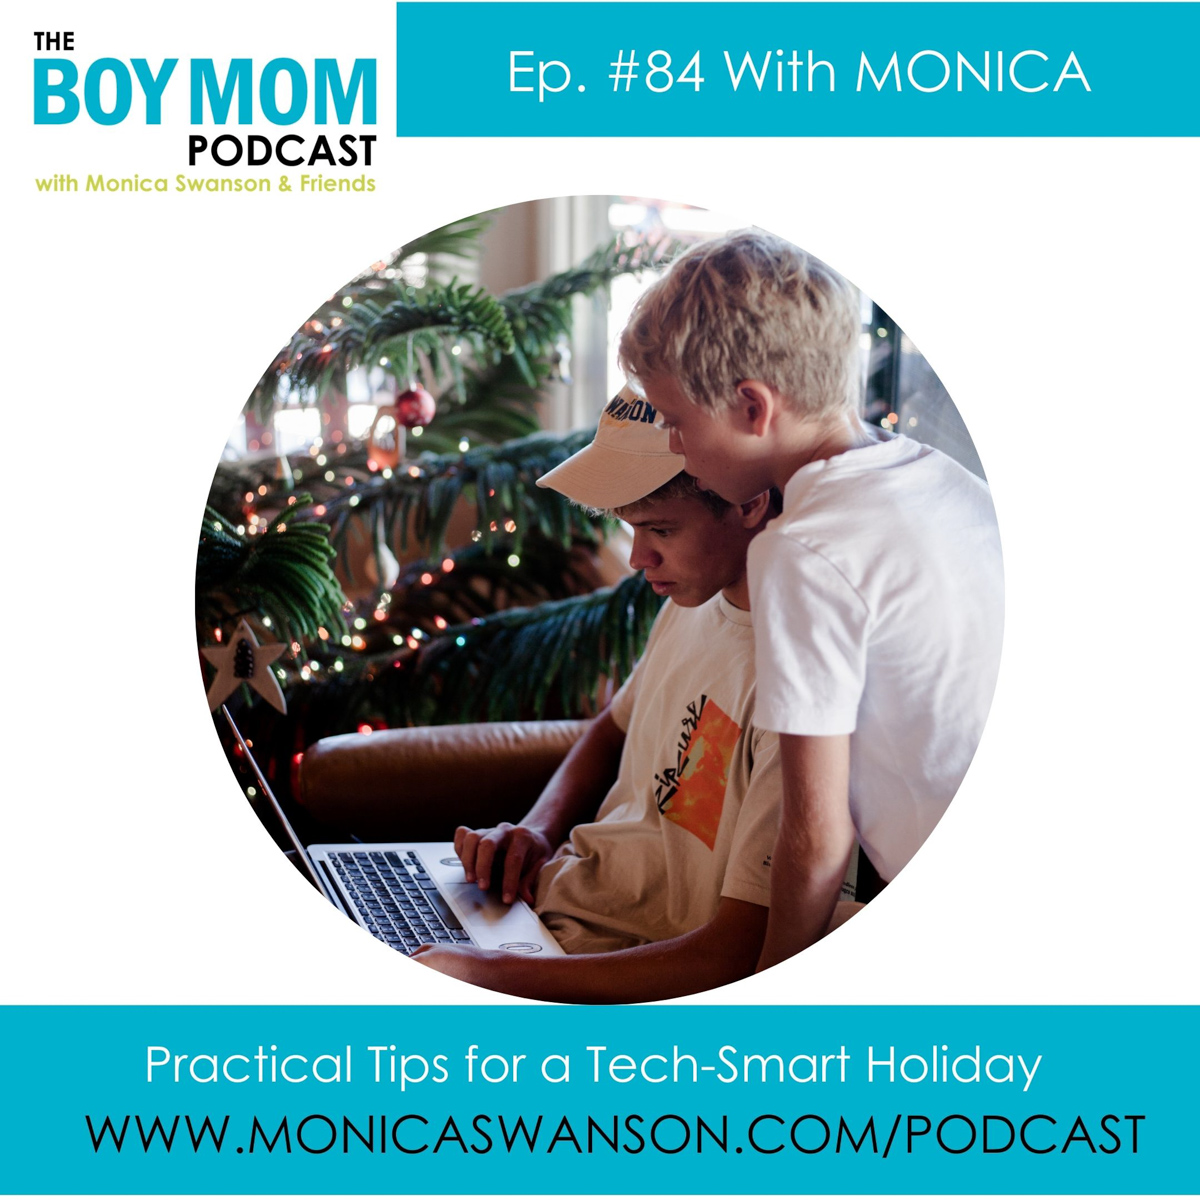 Practical Tips for a Tech-Smart Holiday with Your Kids